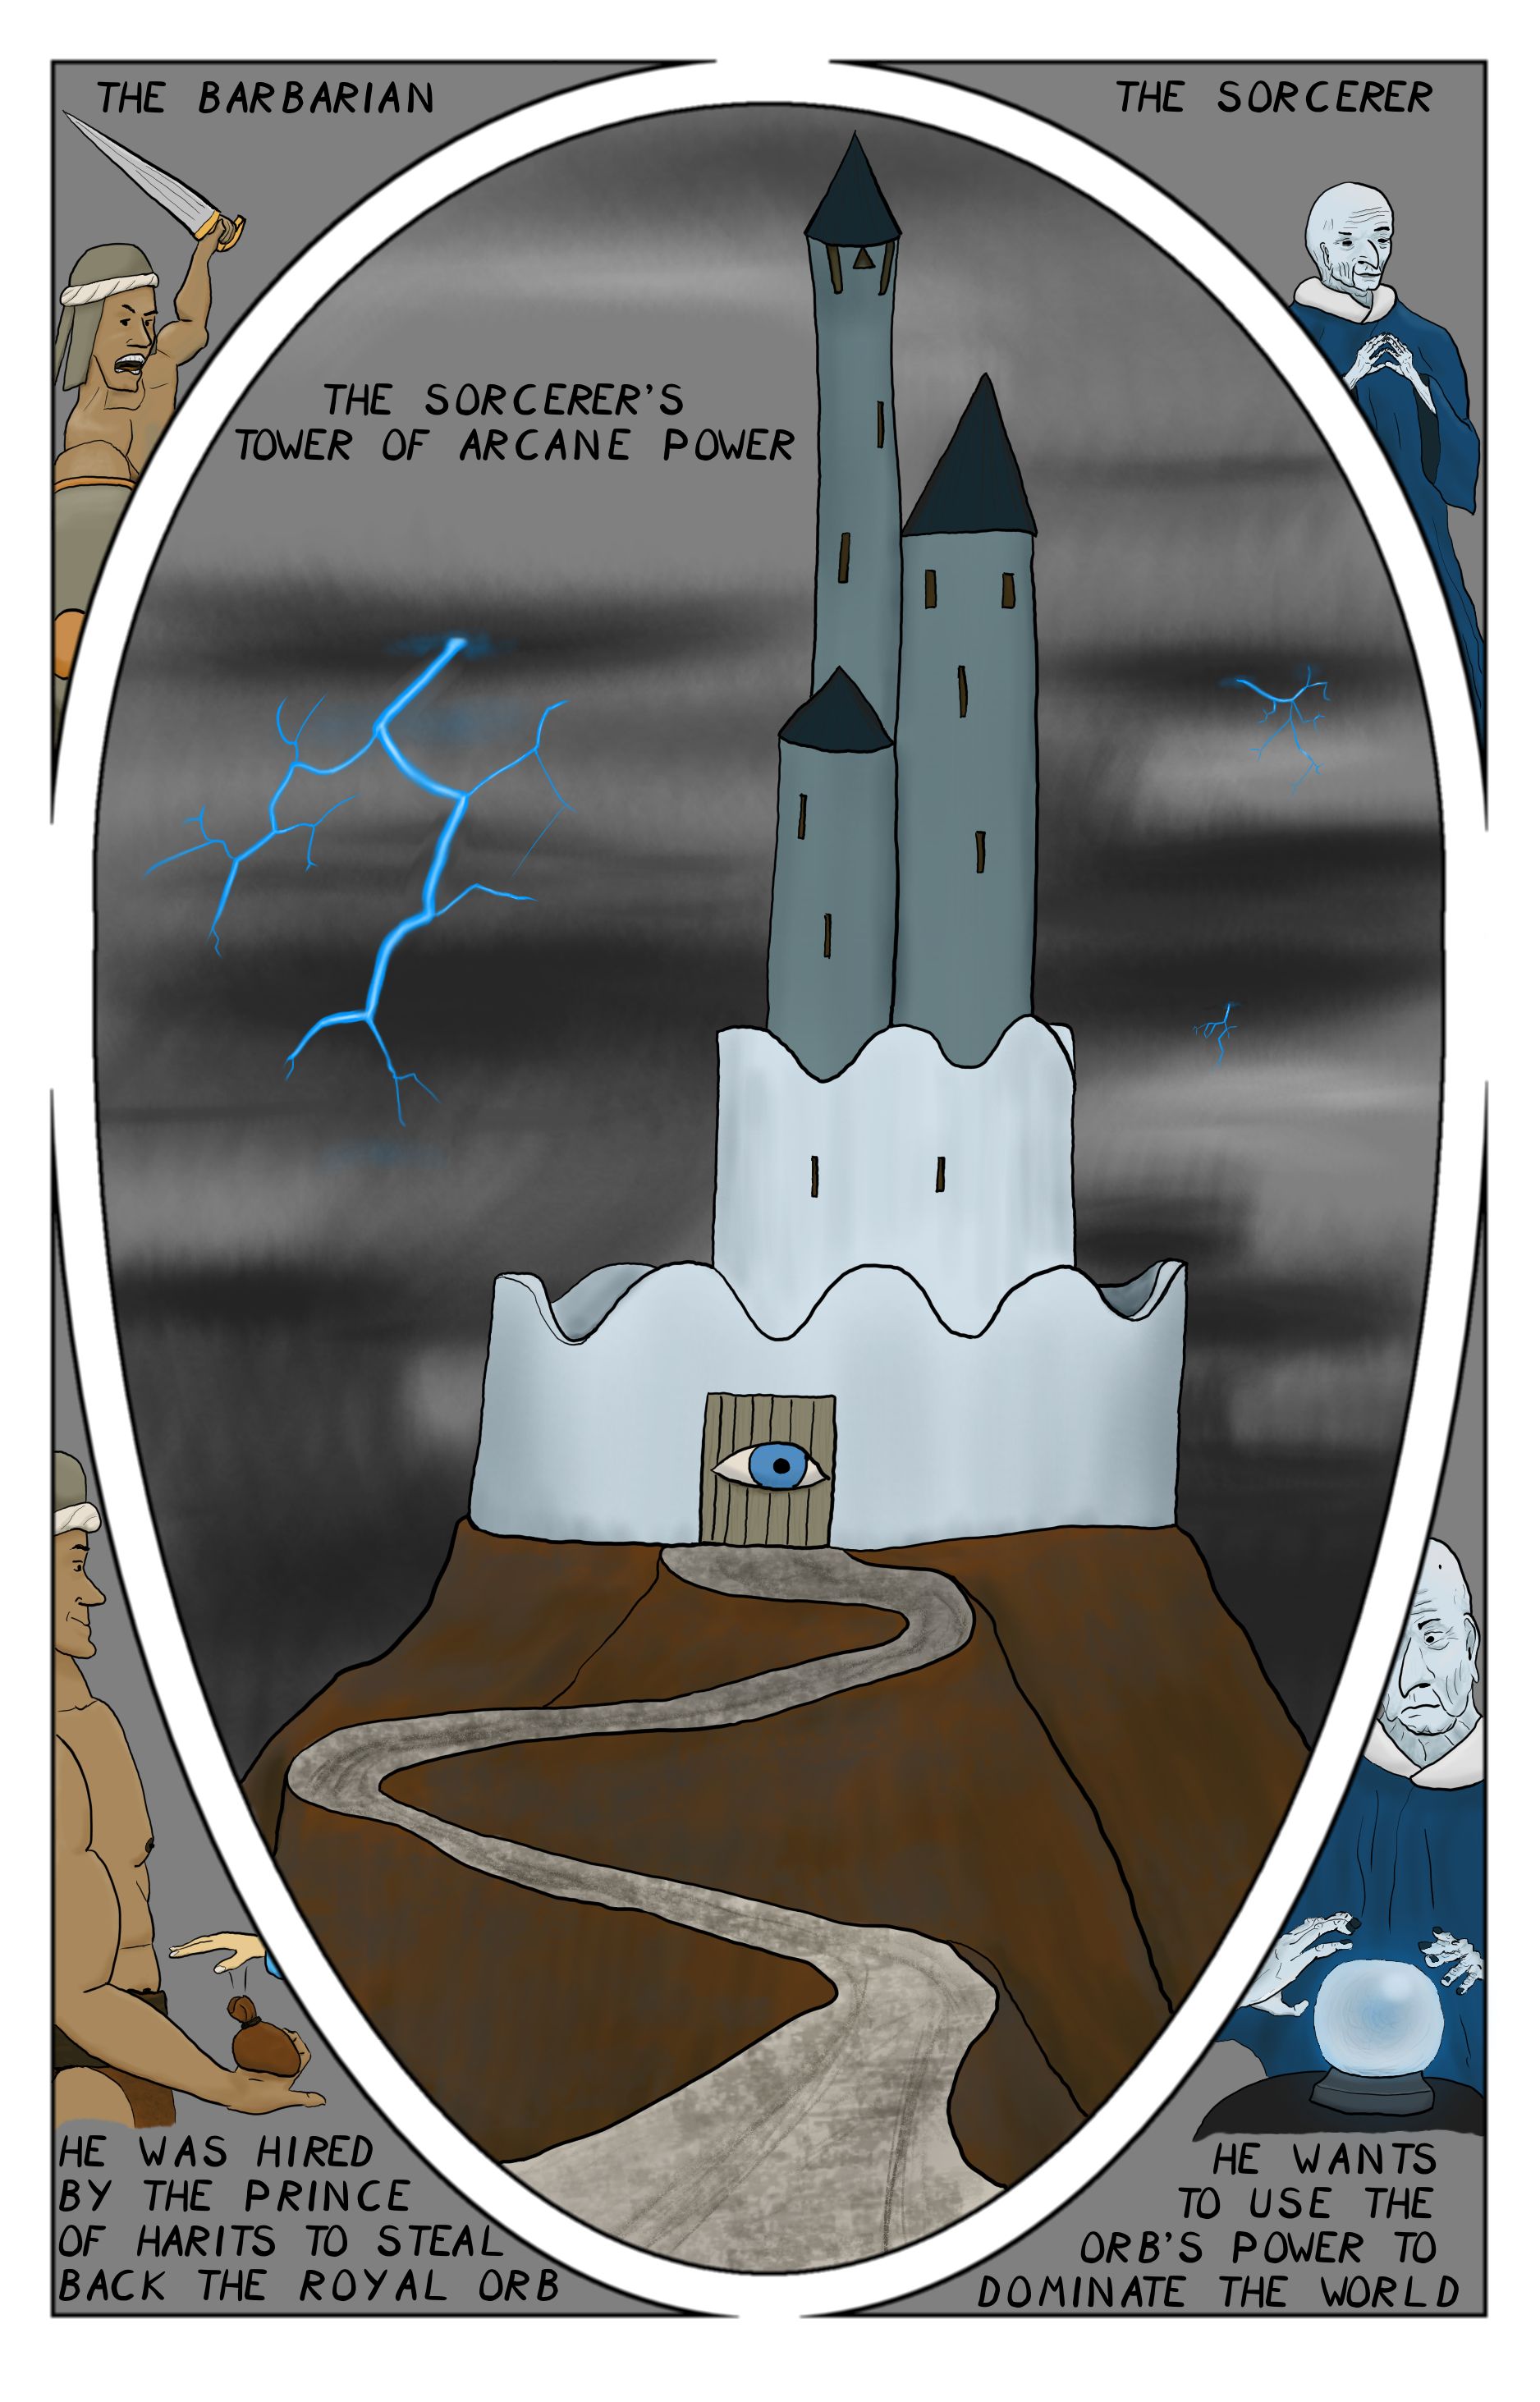 A comic featuring a barbarian on the left corners, a sorcerer on the right corners, and the framed scene of a tower of arcane power, with lightning bolts in the background.